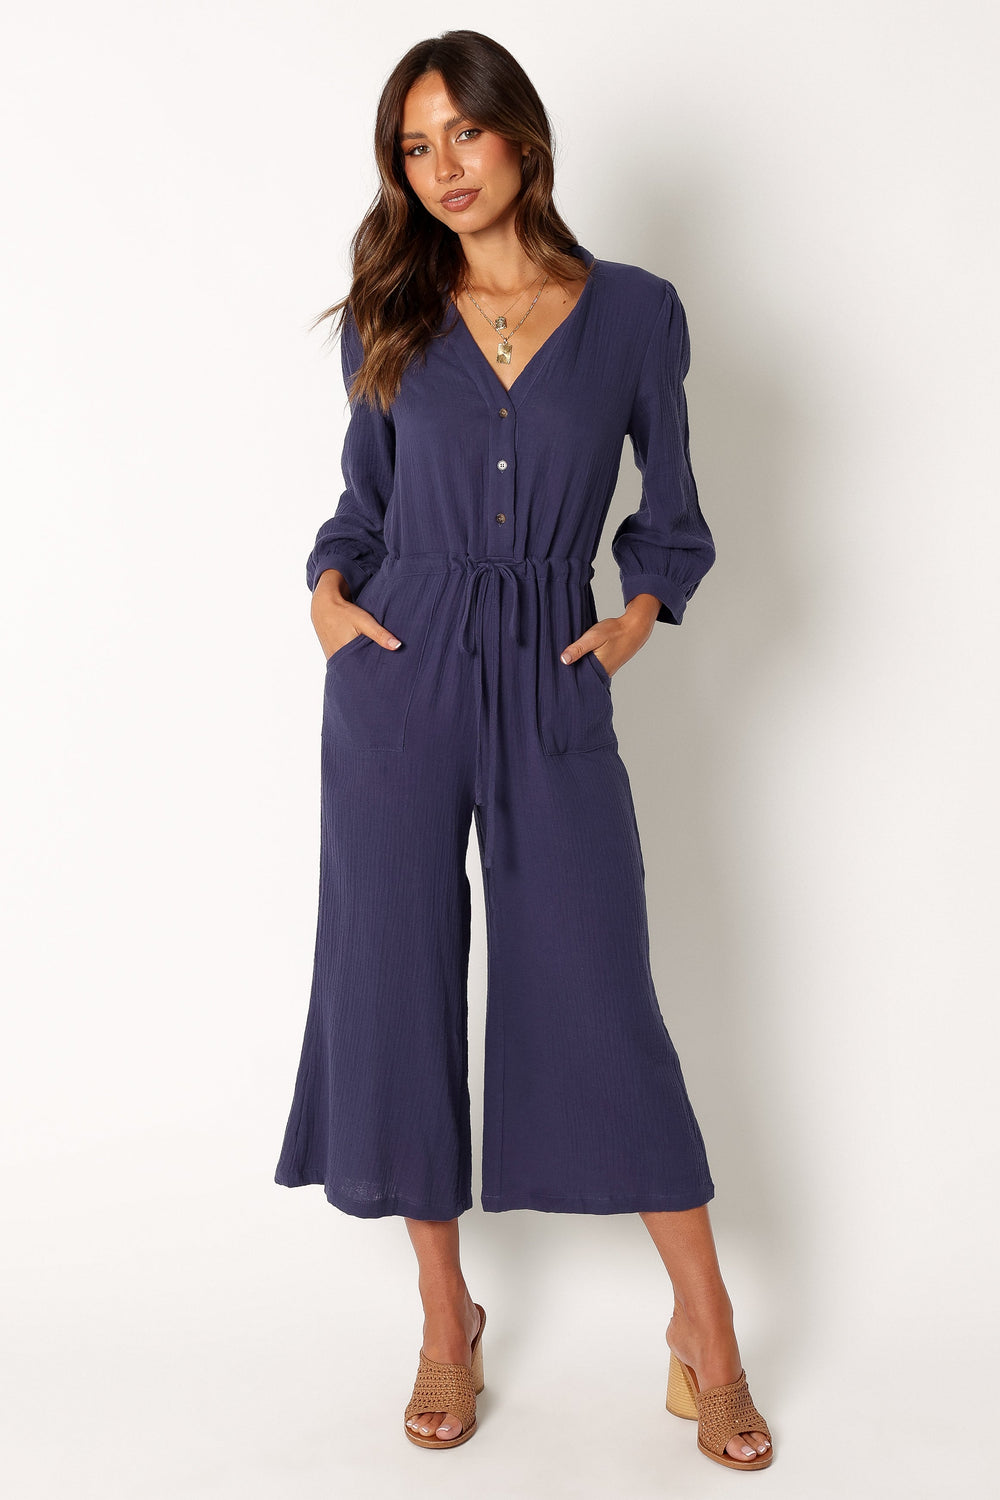 Petal and Pup USA Rompers Roberta Jumpsuit - Navy